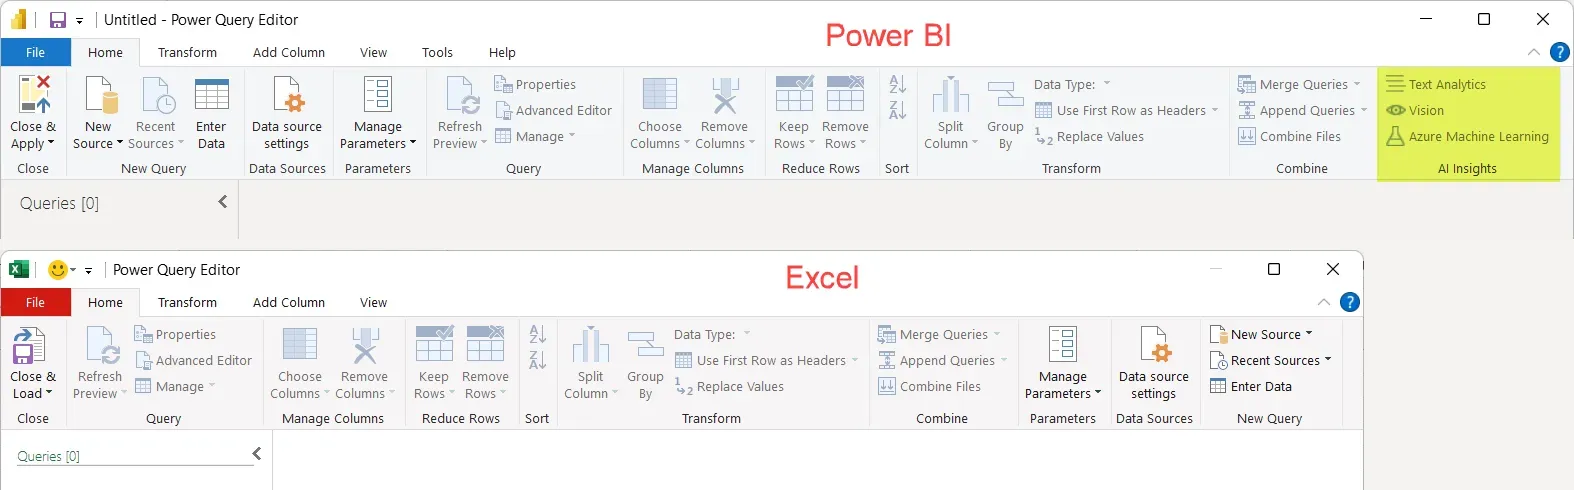 Power Query view in Power BI and Excel